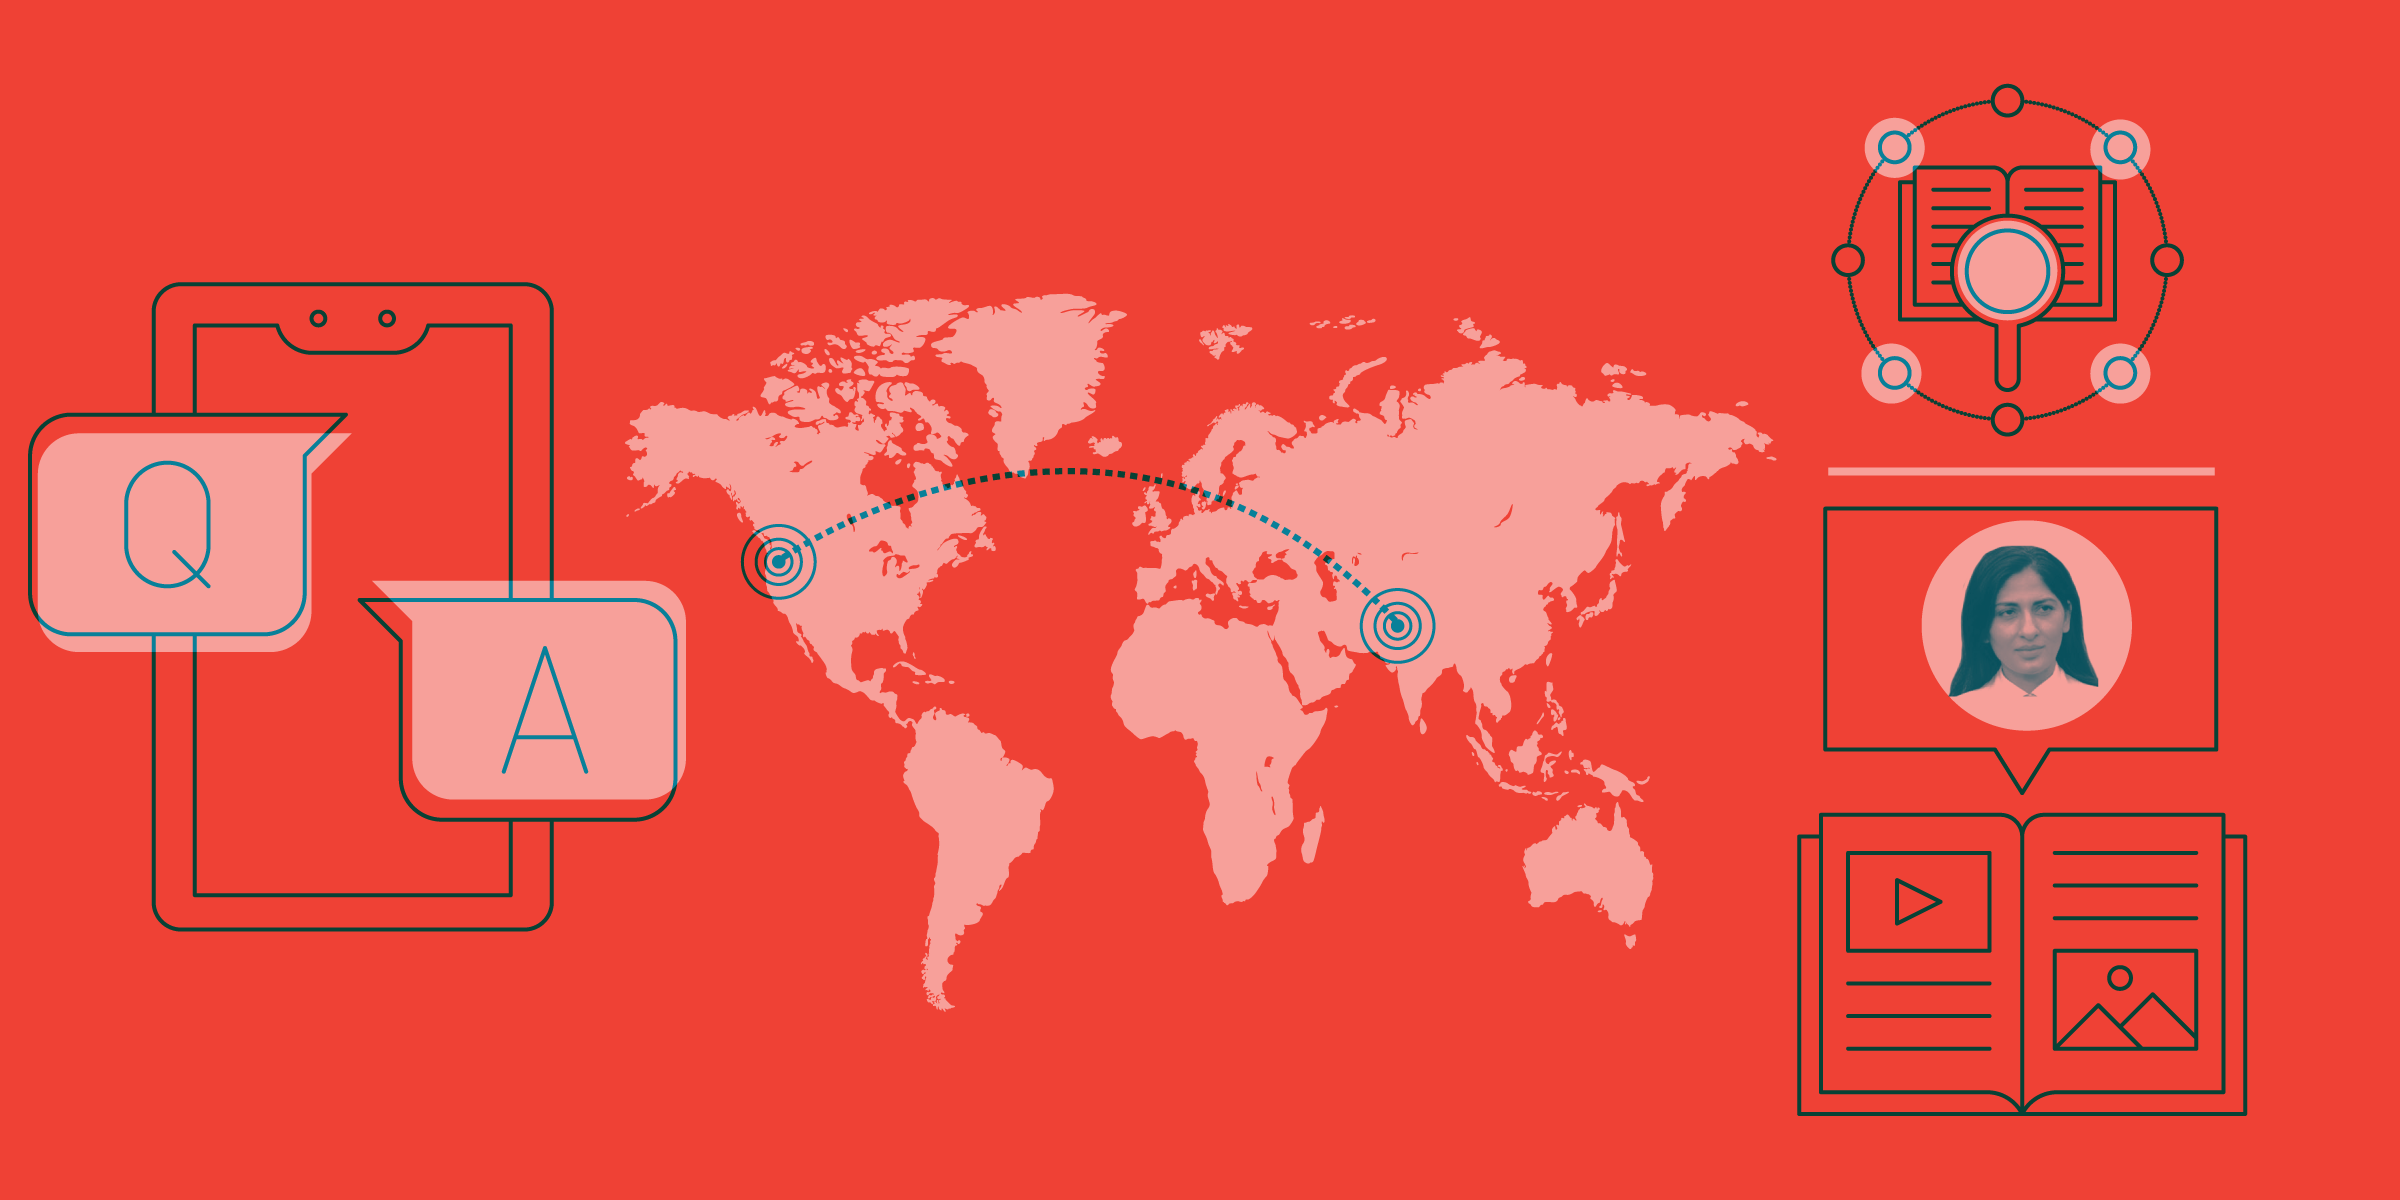 Illustration graphic depicting world map and technological devices